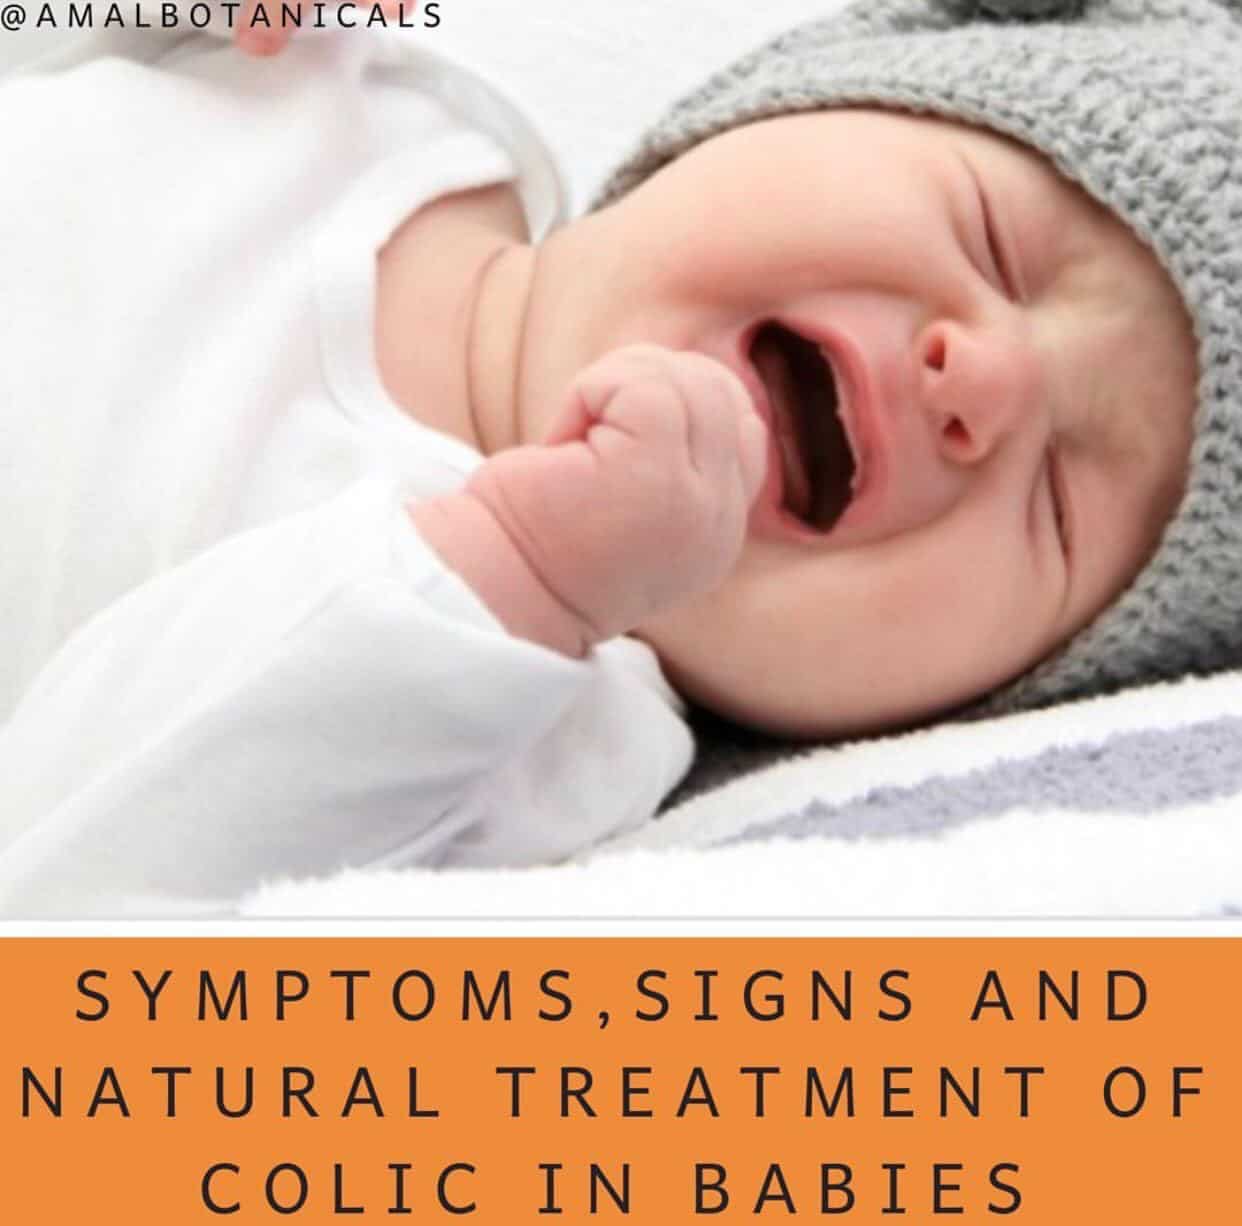 SYMPTOMS, SIGNS, AND NATURAL TREATMENT OF COLIC IN BABIES